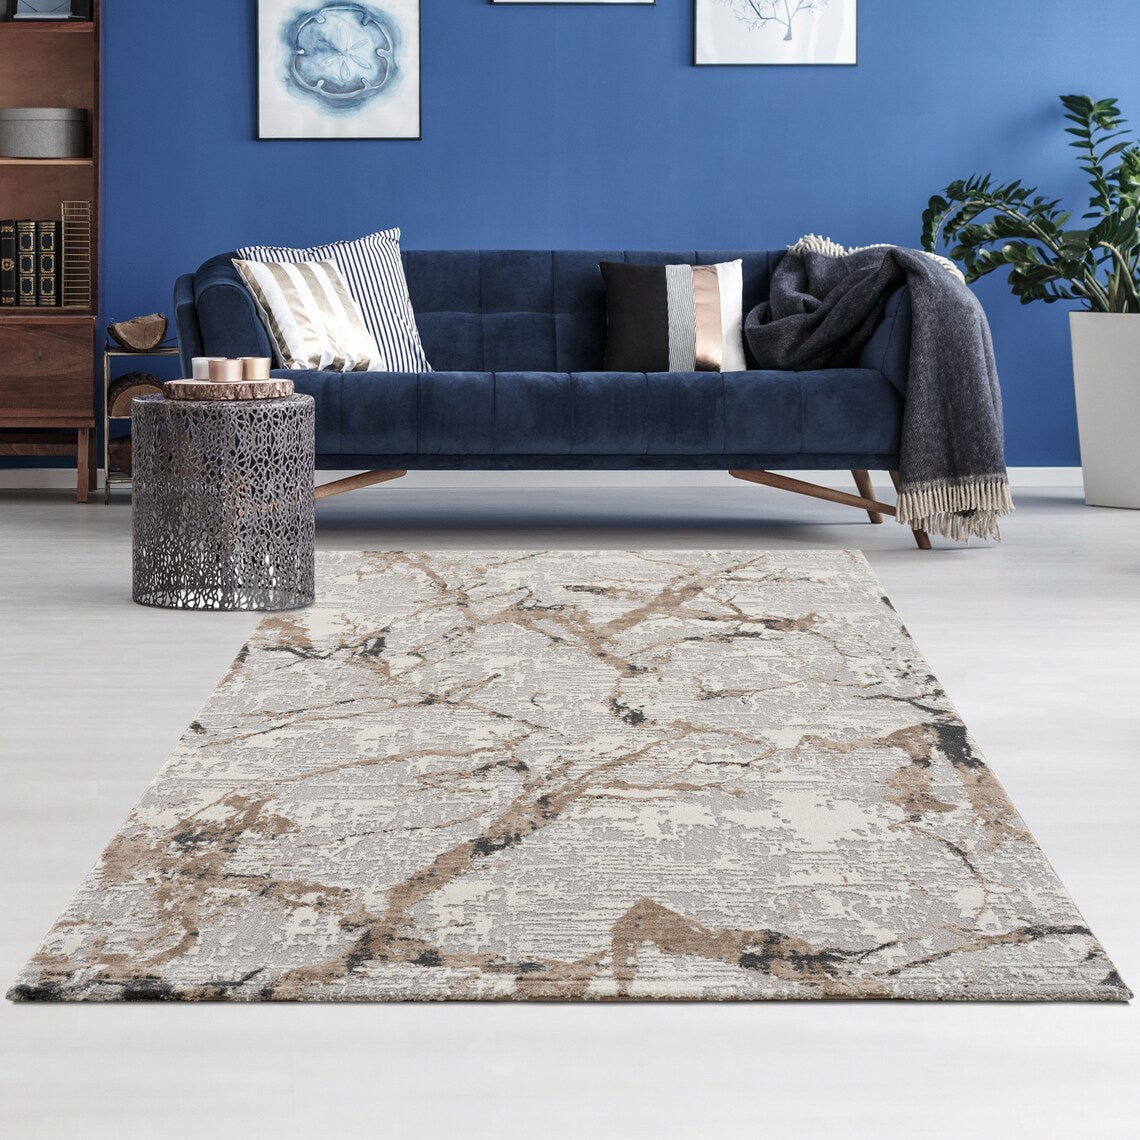 Gabardin Stylish High Quality Multi Coloured Shaped&Patterned Living Room Saloon Rugs-Carpets